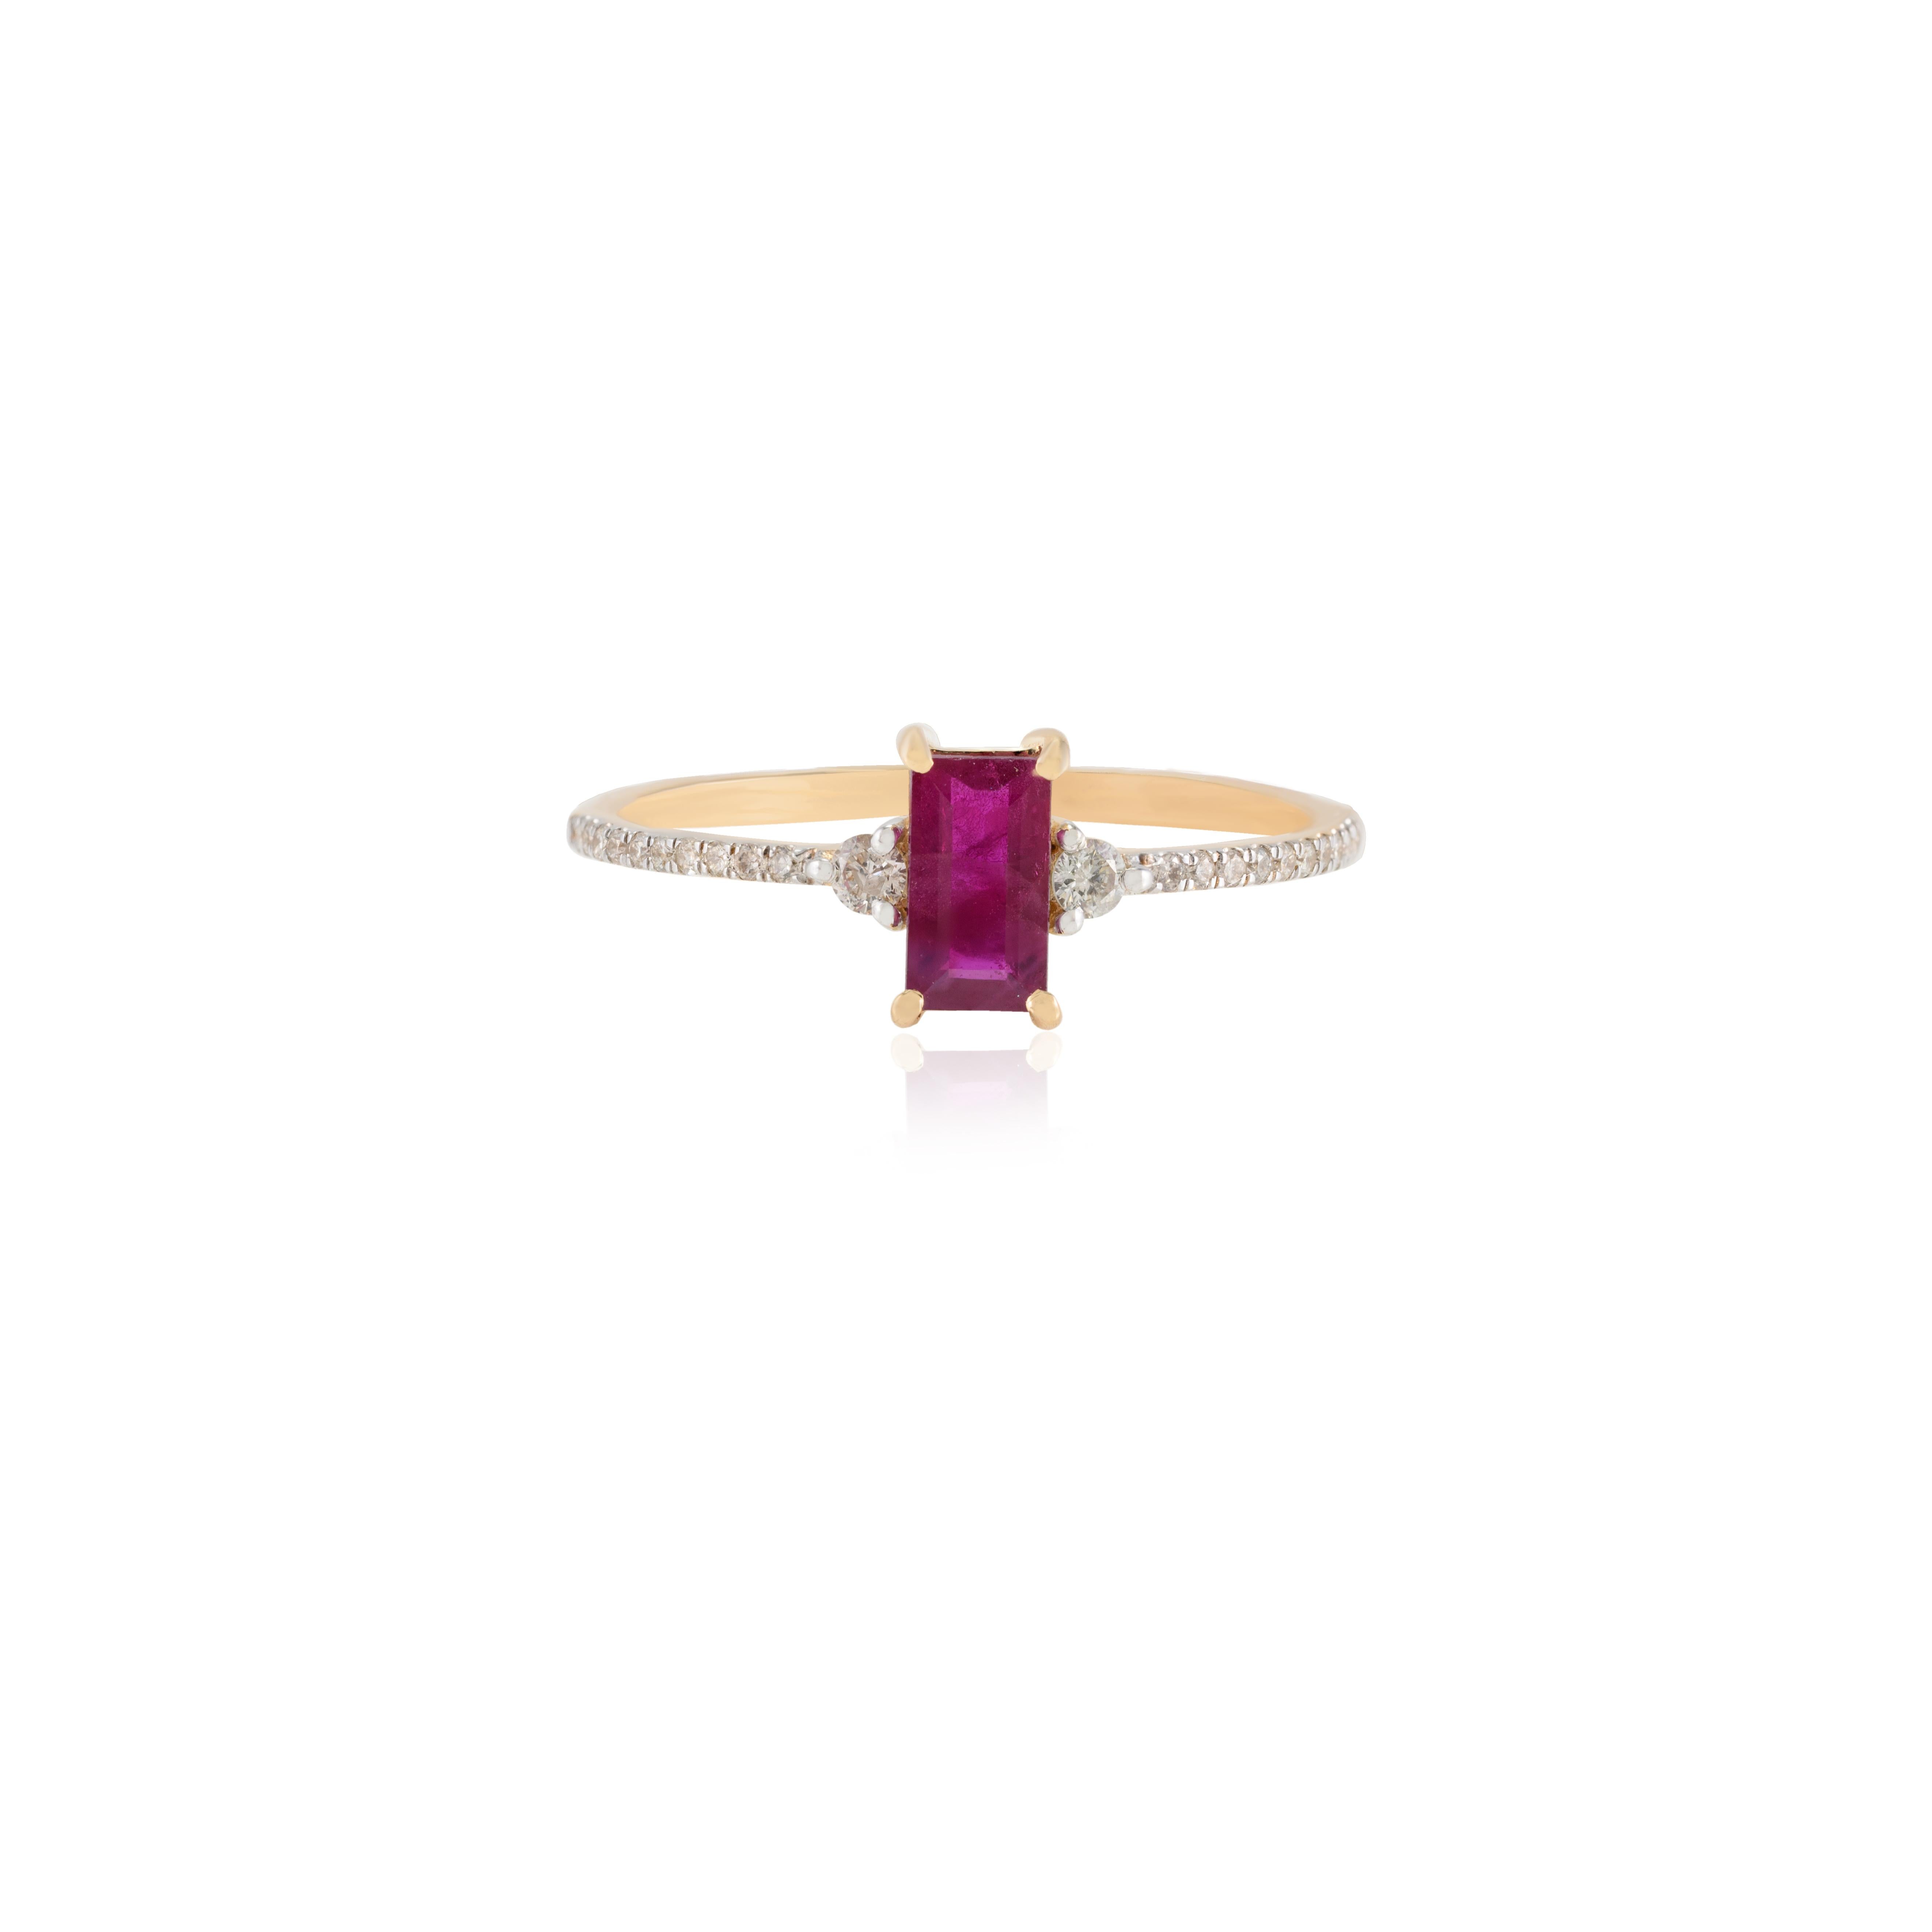 For Sale:  Baguette Cut Ruby and Diamond Stacking Ring in 14k Solid Yellow Gold For Her 3